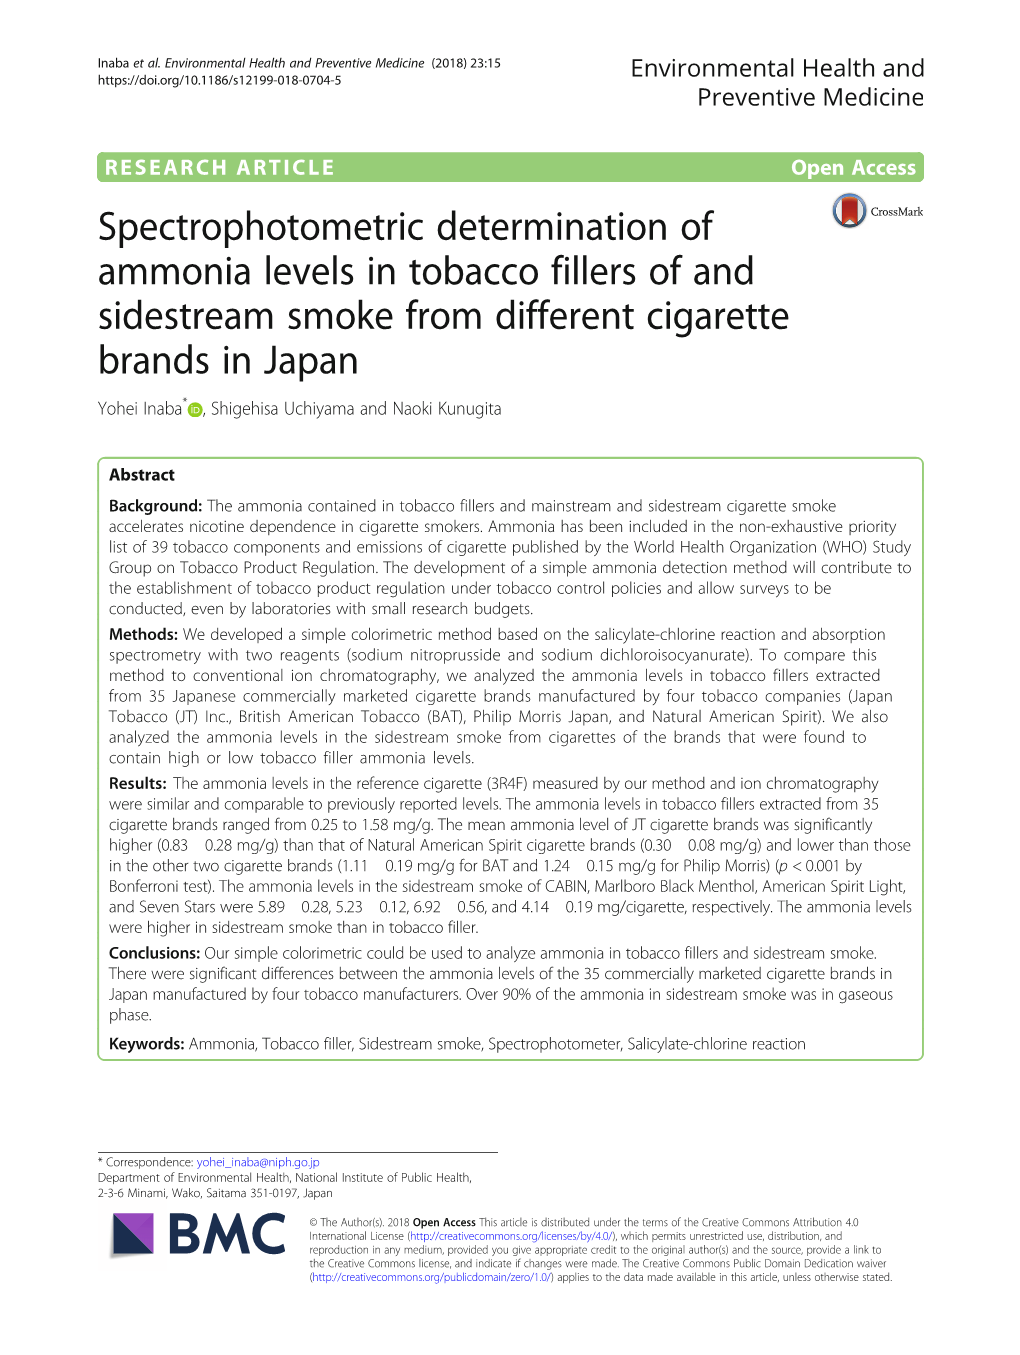 Spectrophotometric Determination of Ammonia Levels in Tobacco Fillers Of